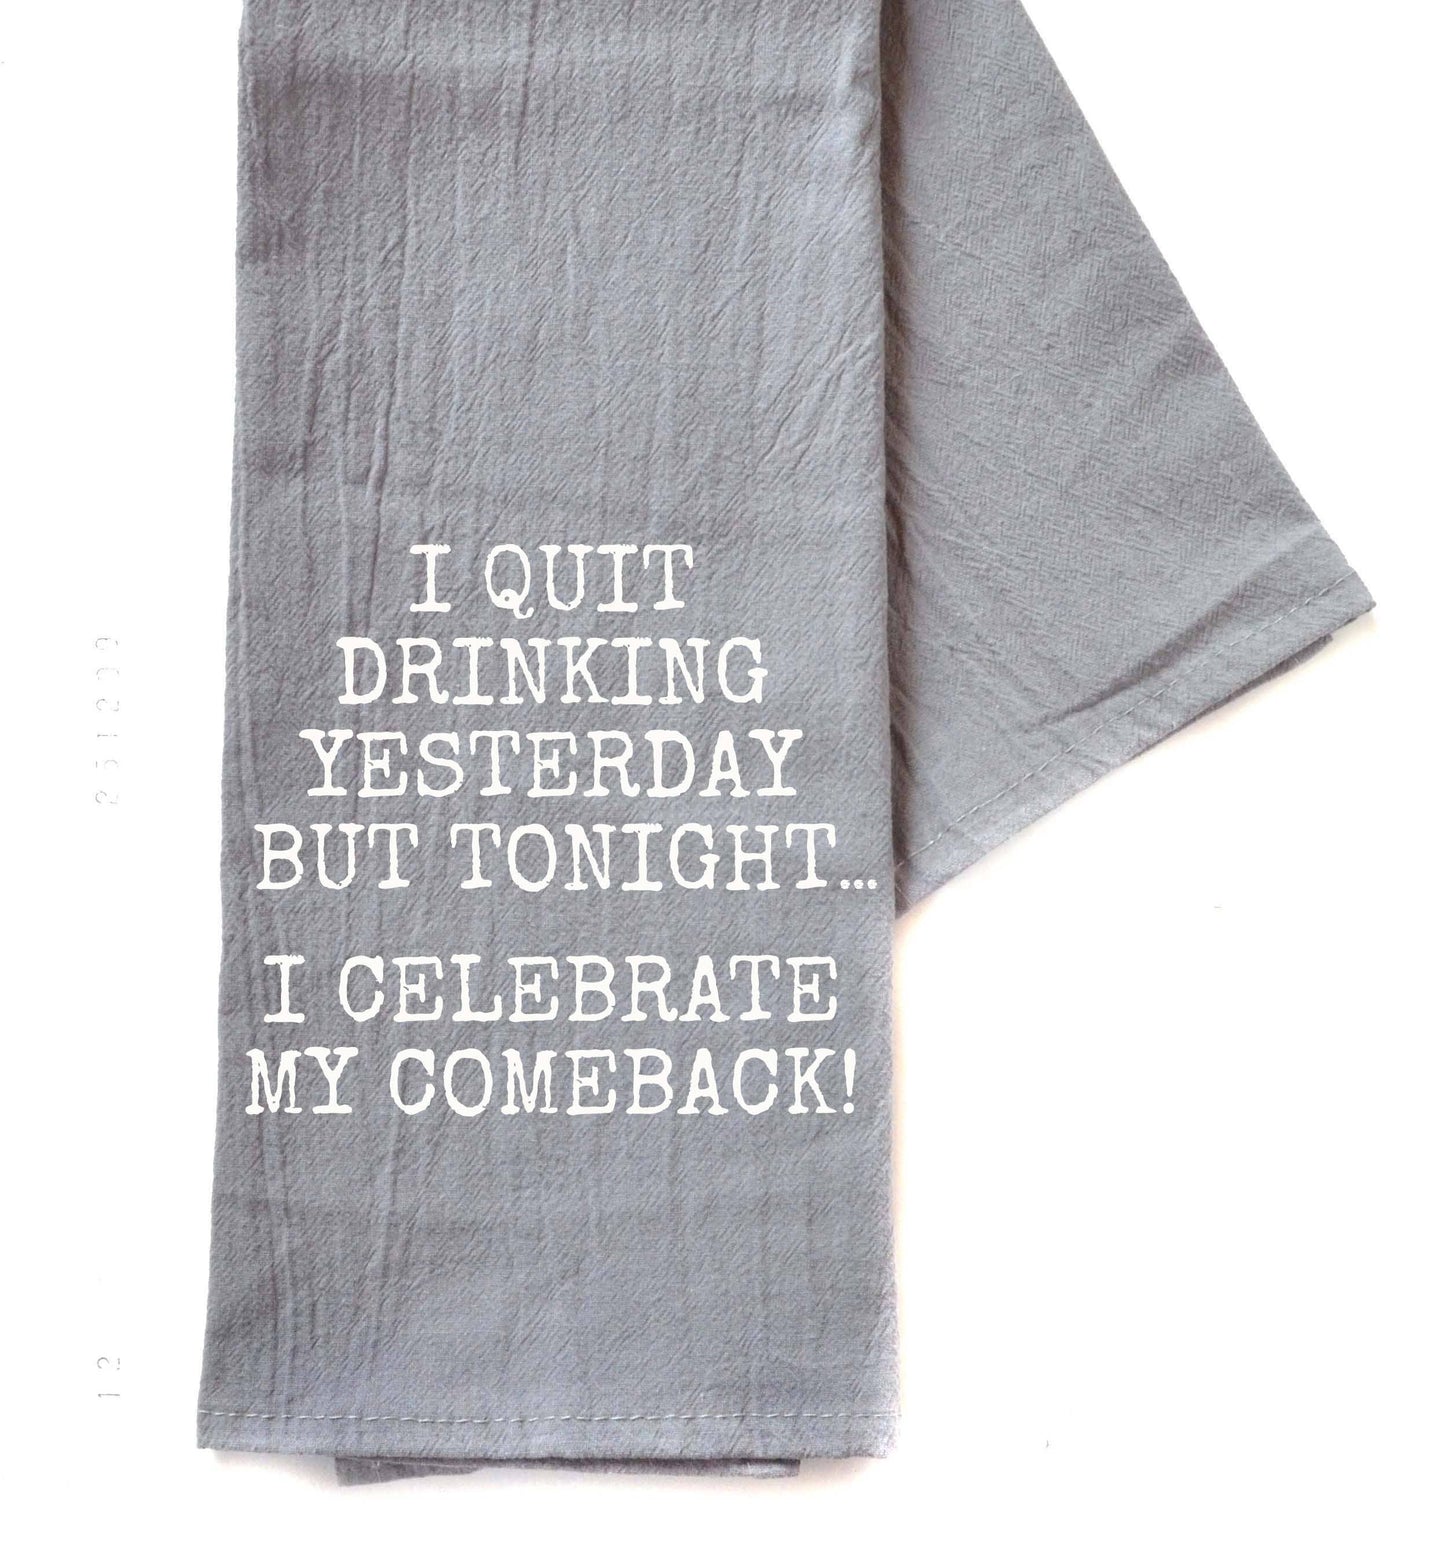 I Quit Drinking Yesterday - Gray Tea Towel - Funny Towel